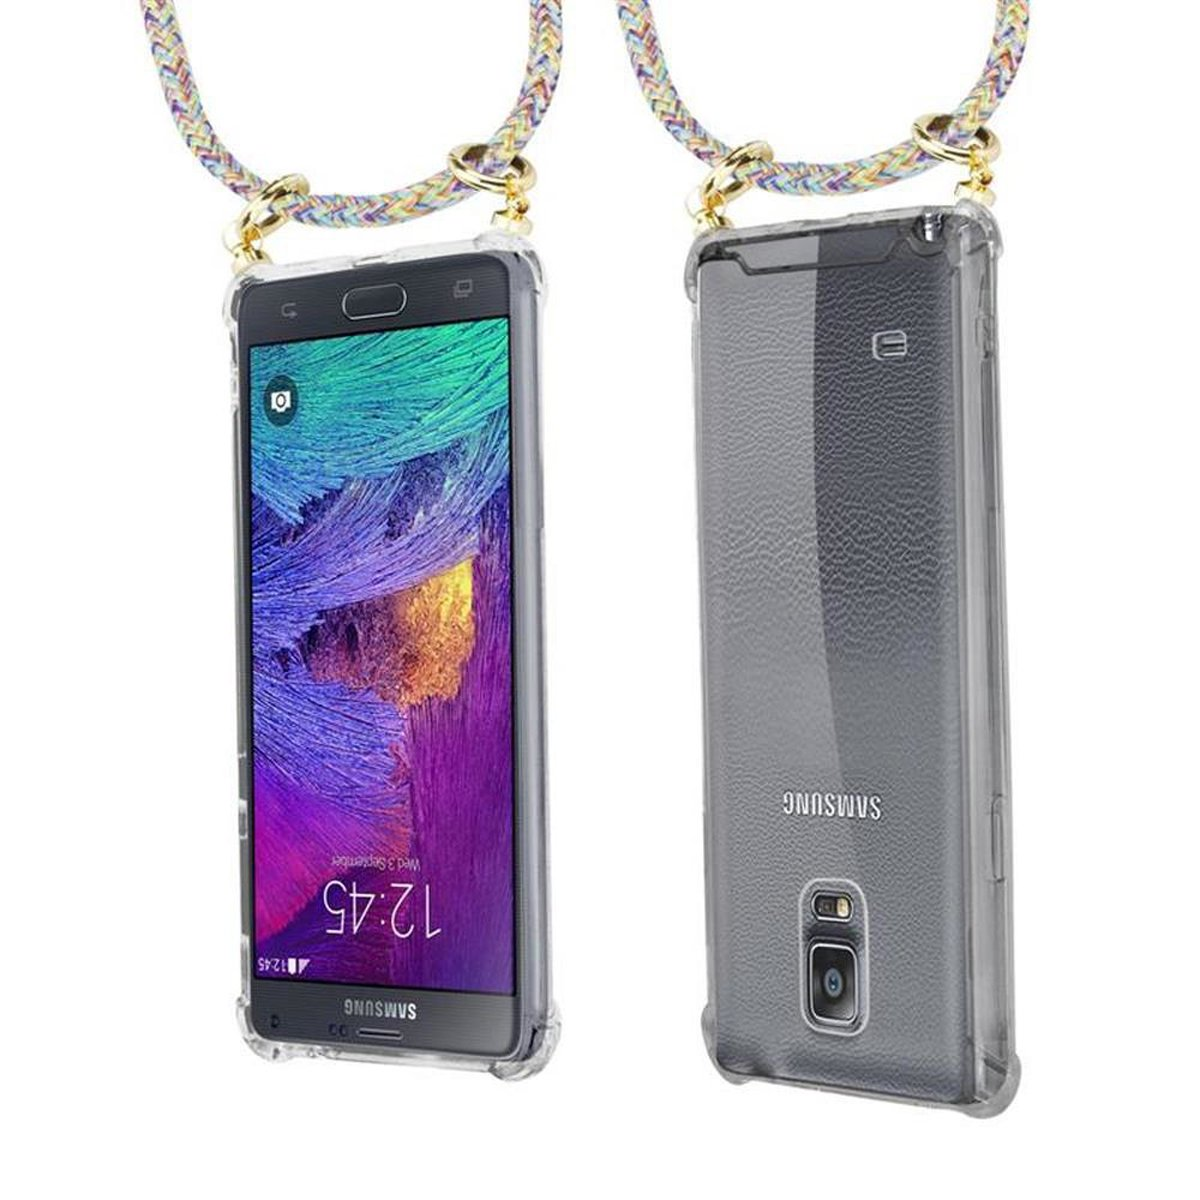 CADORABO Handy Galaxy Band mit Kette Gold 4, NOTE und Ringen, Kordel Samsung, Hülle, RAINBOW Backcover, abnehmbarer